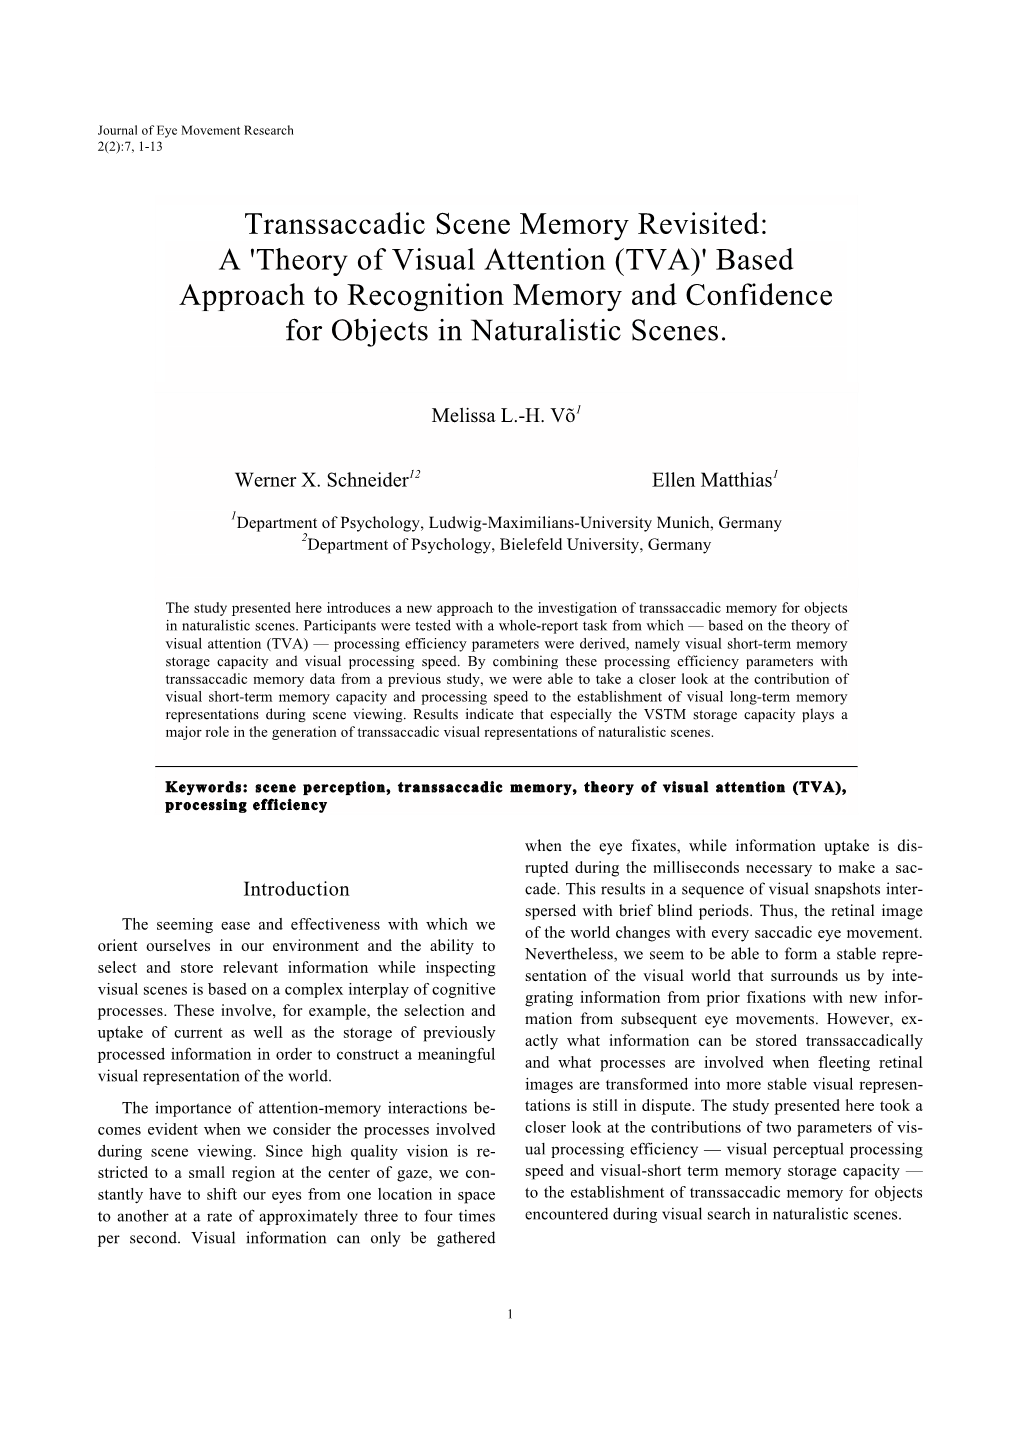 Transsaccadic Scene Memory Revisited: a 'Theory of Visual Attention (TVA)' Based Approach to Recognition Memory and Confidence for Objects in Naturalistic Scenes